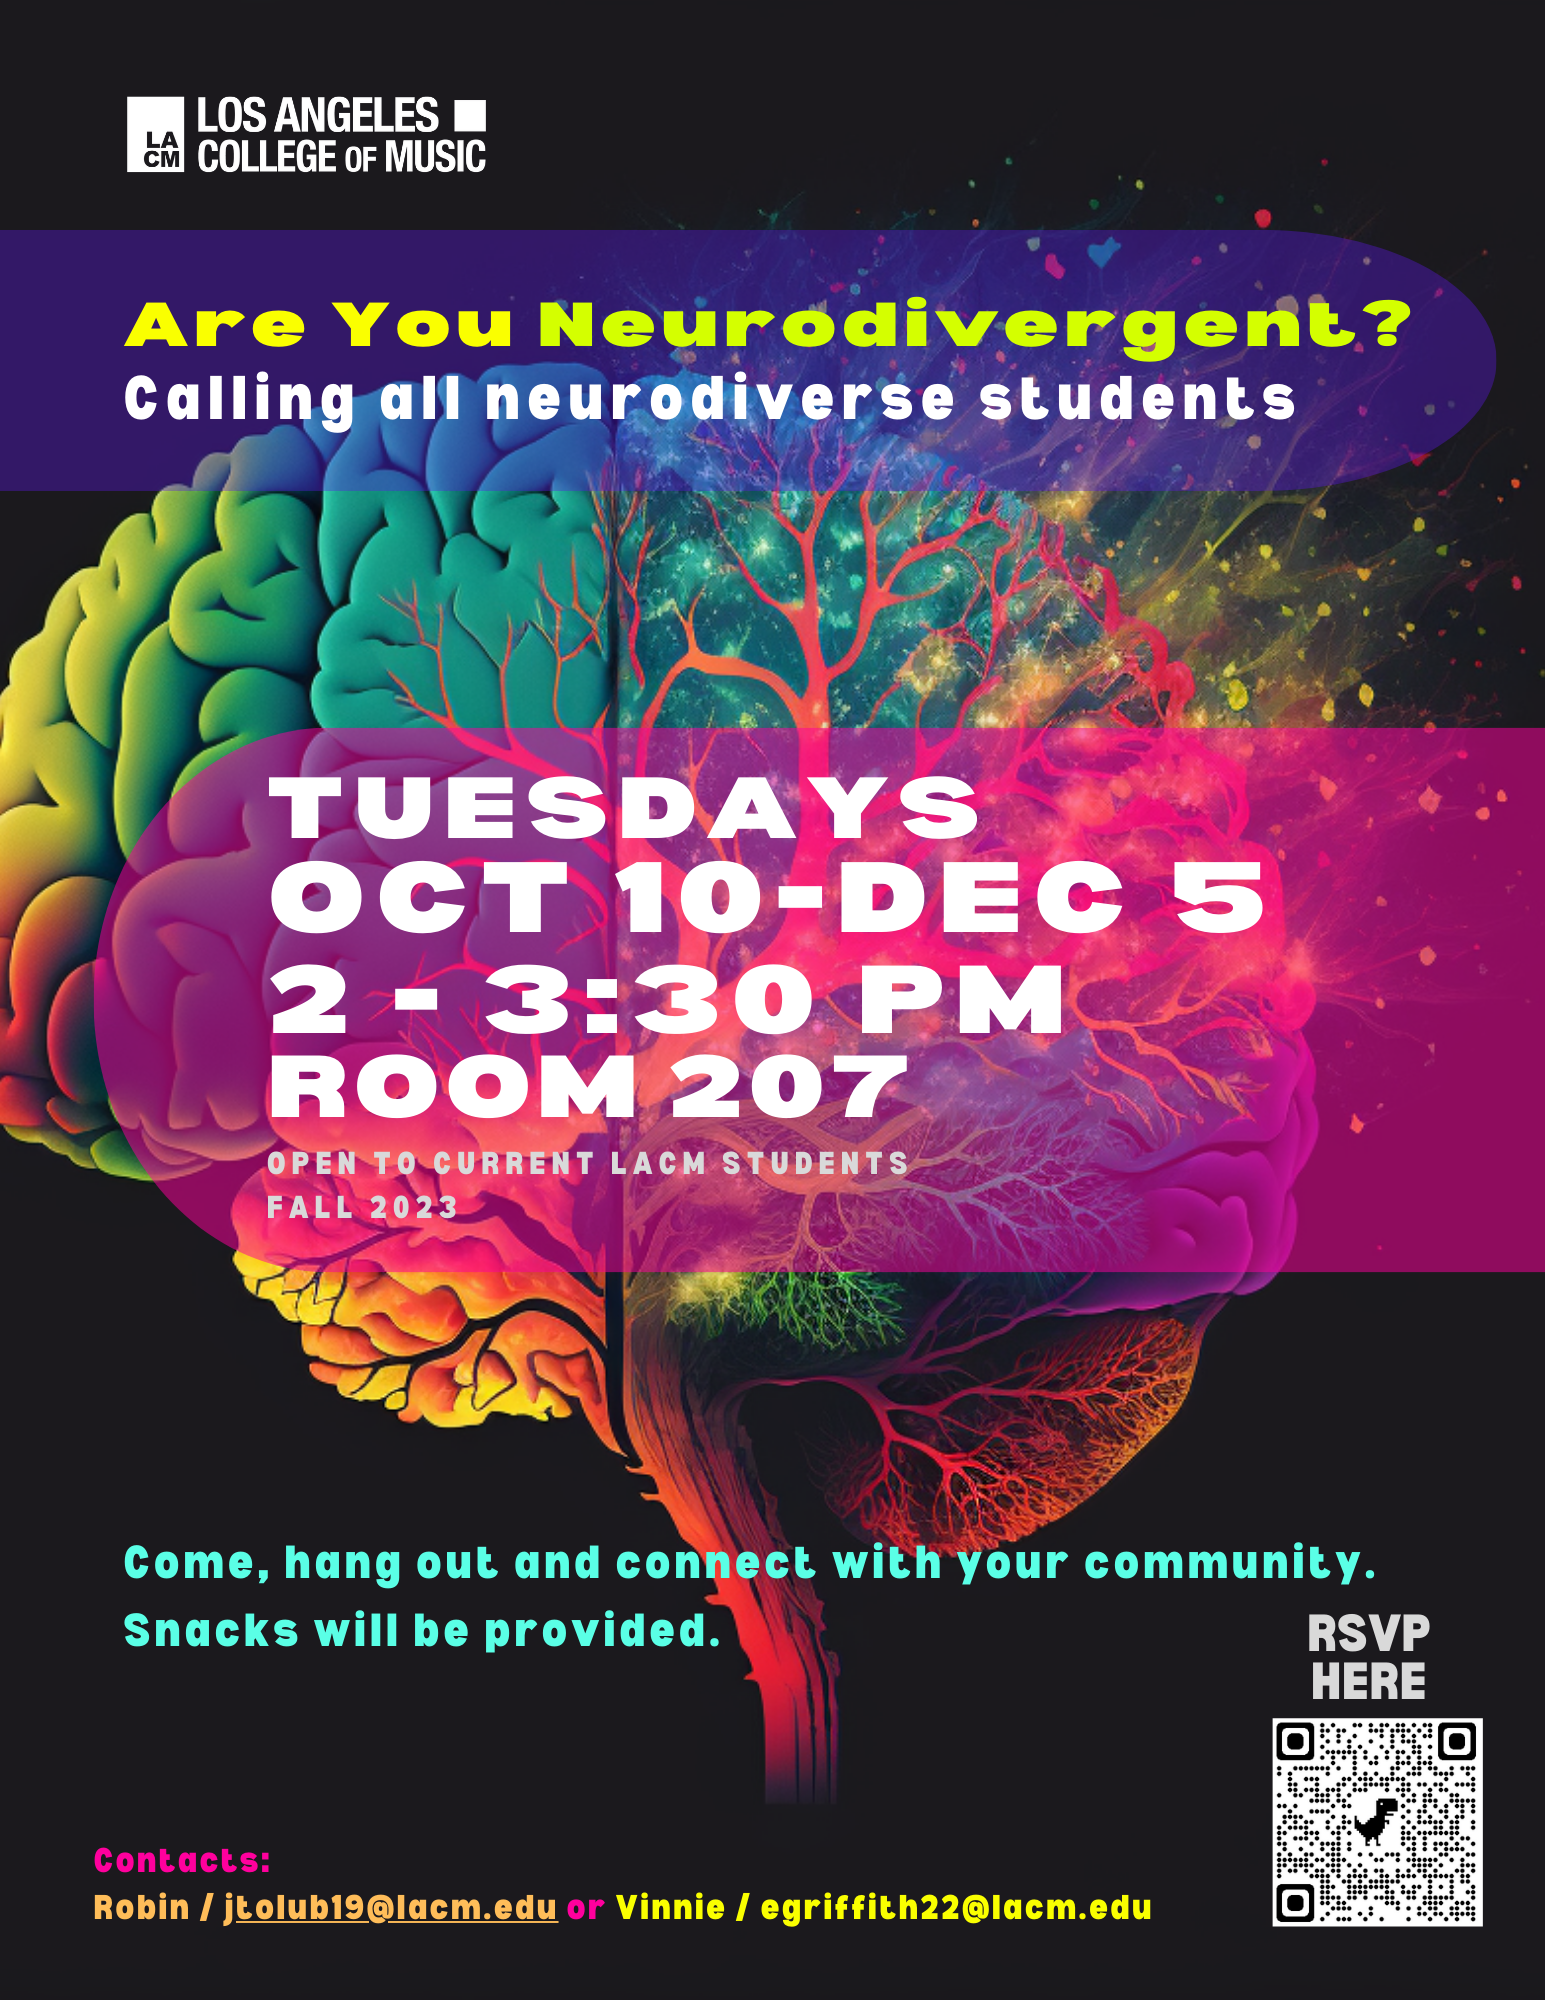 Neurodiversity Group Meeting Flyer for Tuesdays 2-3:30 PM in Room 207. It is open to LACM students who can RSVP on the student activity form.